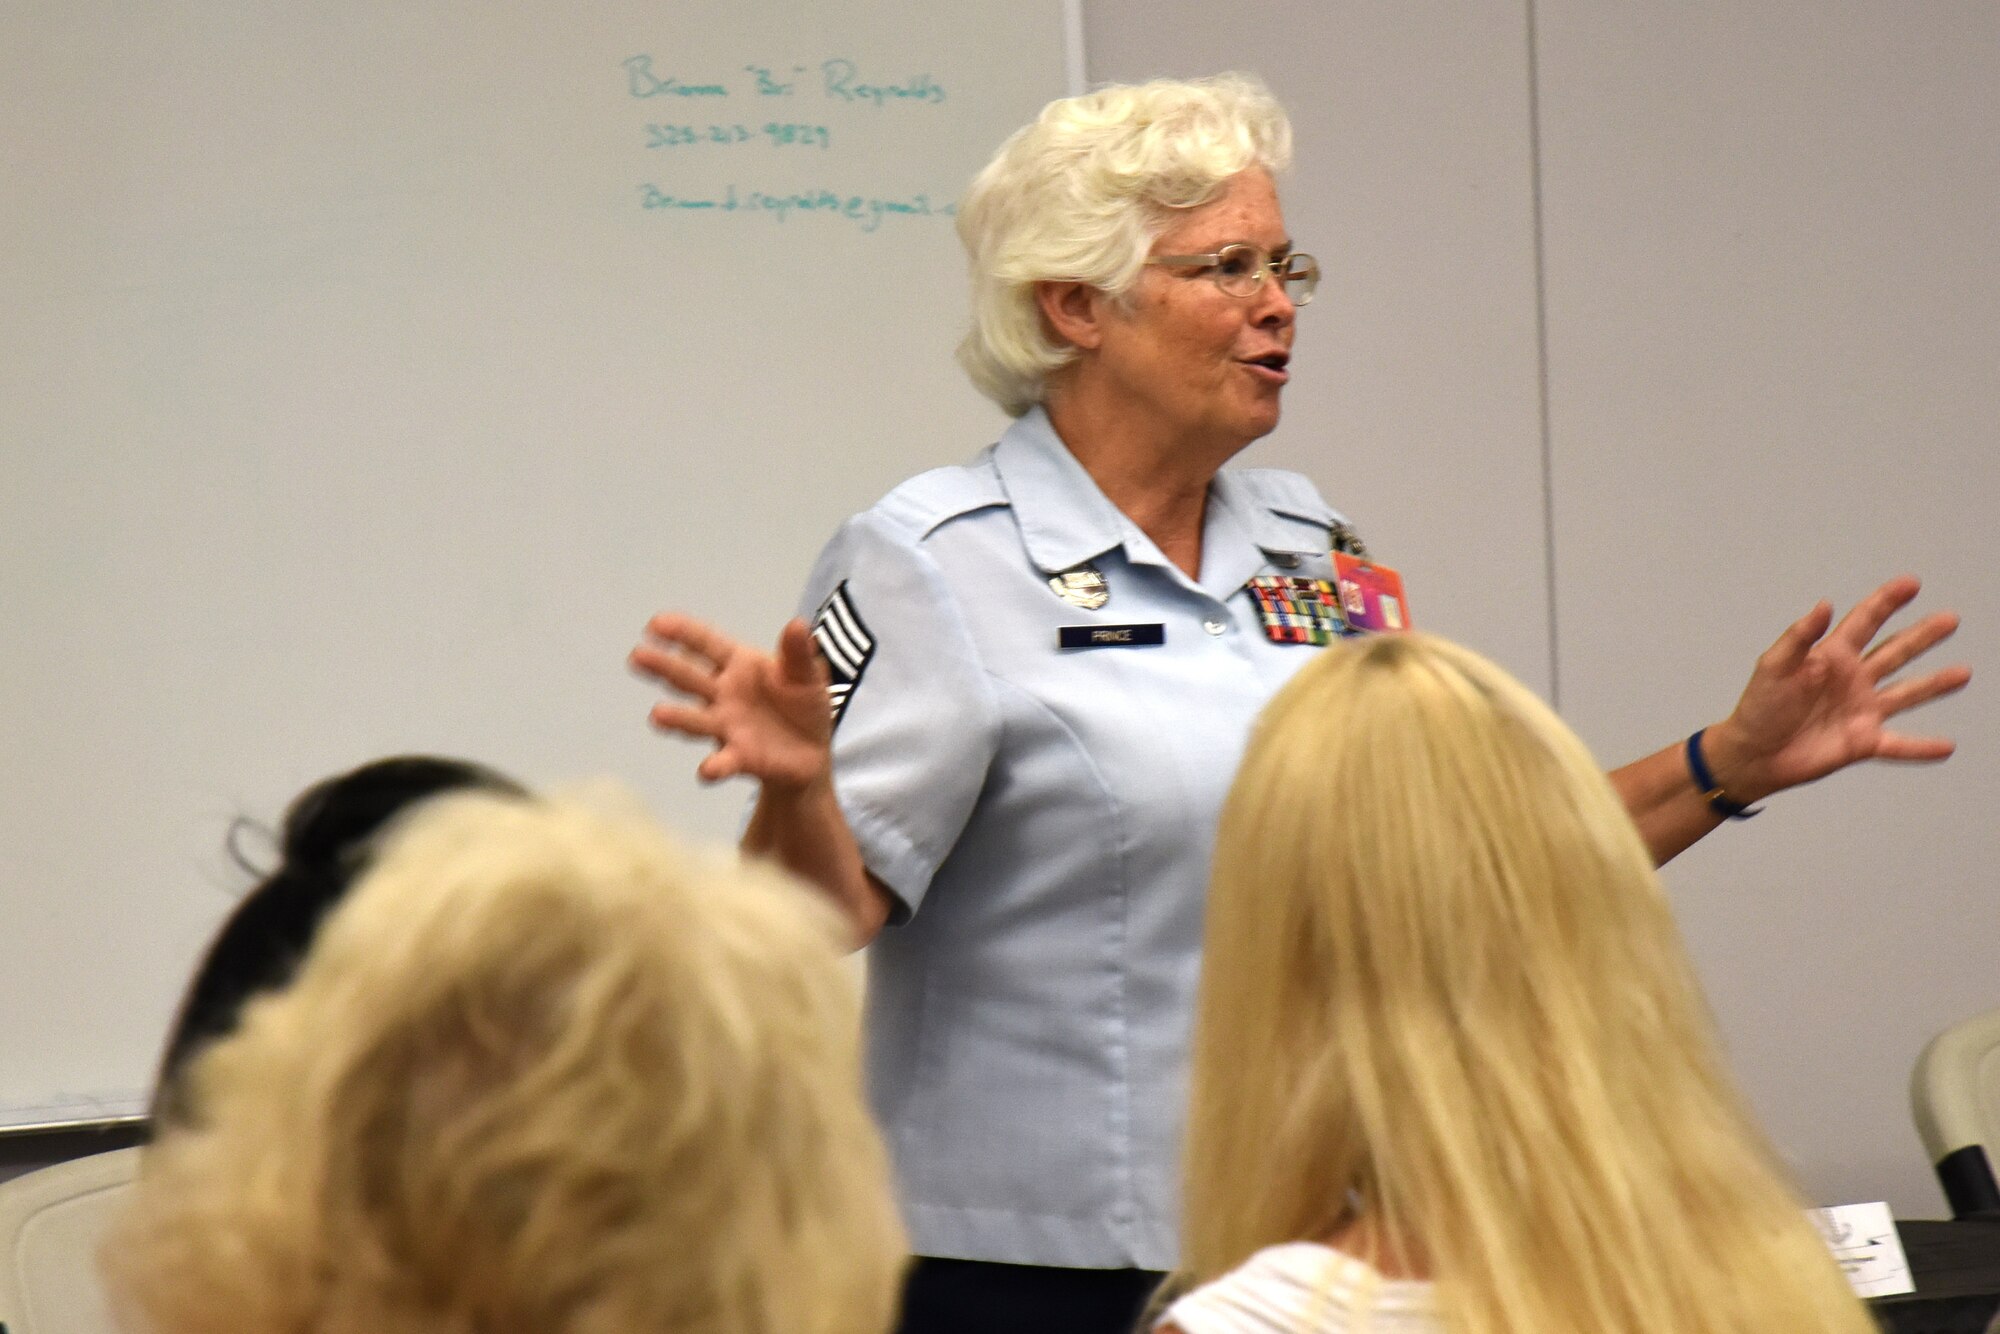 Retired U.S. Air Force Chief Master Sgt. Kathleen Prince, Central High School Junior ROTC instructor, reminisces about her time with the Women in the Air Force program before being allowed to join the regular Air Force during her speech for Women’s Equality day at the Taylor Chapel on Goodfellow Air Force Base, Texas, Aug. 24, 2018. Prince shared moments from her career and how the opportunities for women have increased since she joined in 1975. (U.S. Air Force photo by Airman 1st Class Seraiah Hines/Released)